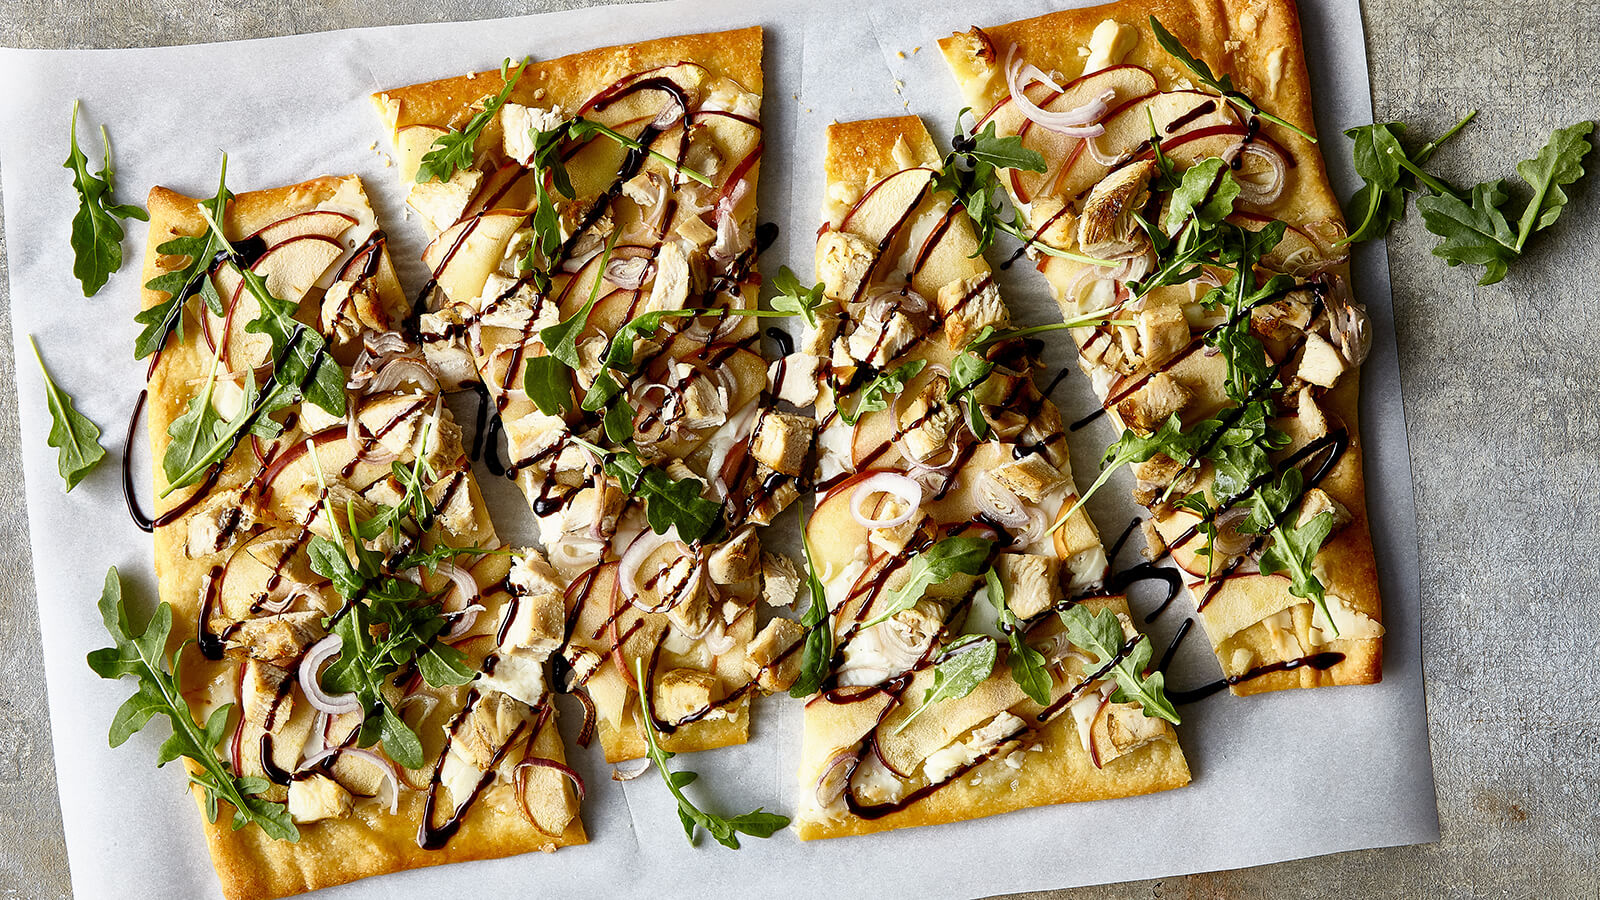 Crisp Apple, Spanish Goat Cheese and Grilled Chicken Flatbread